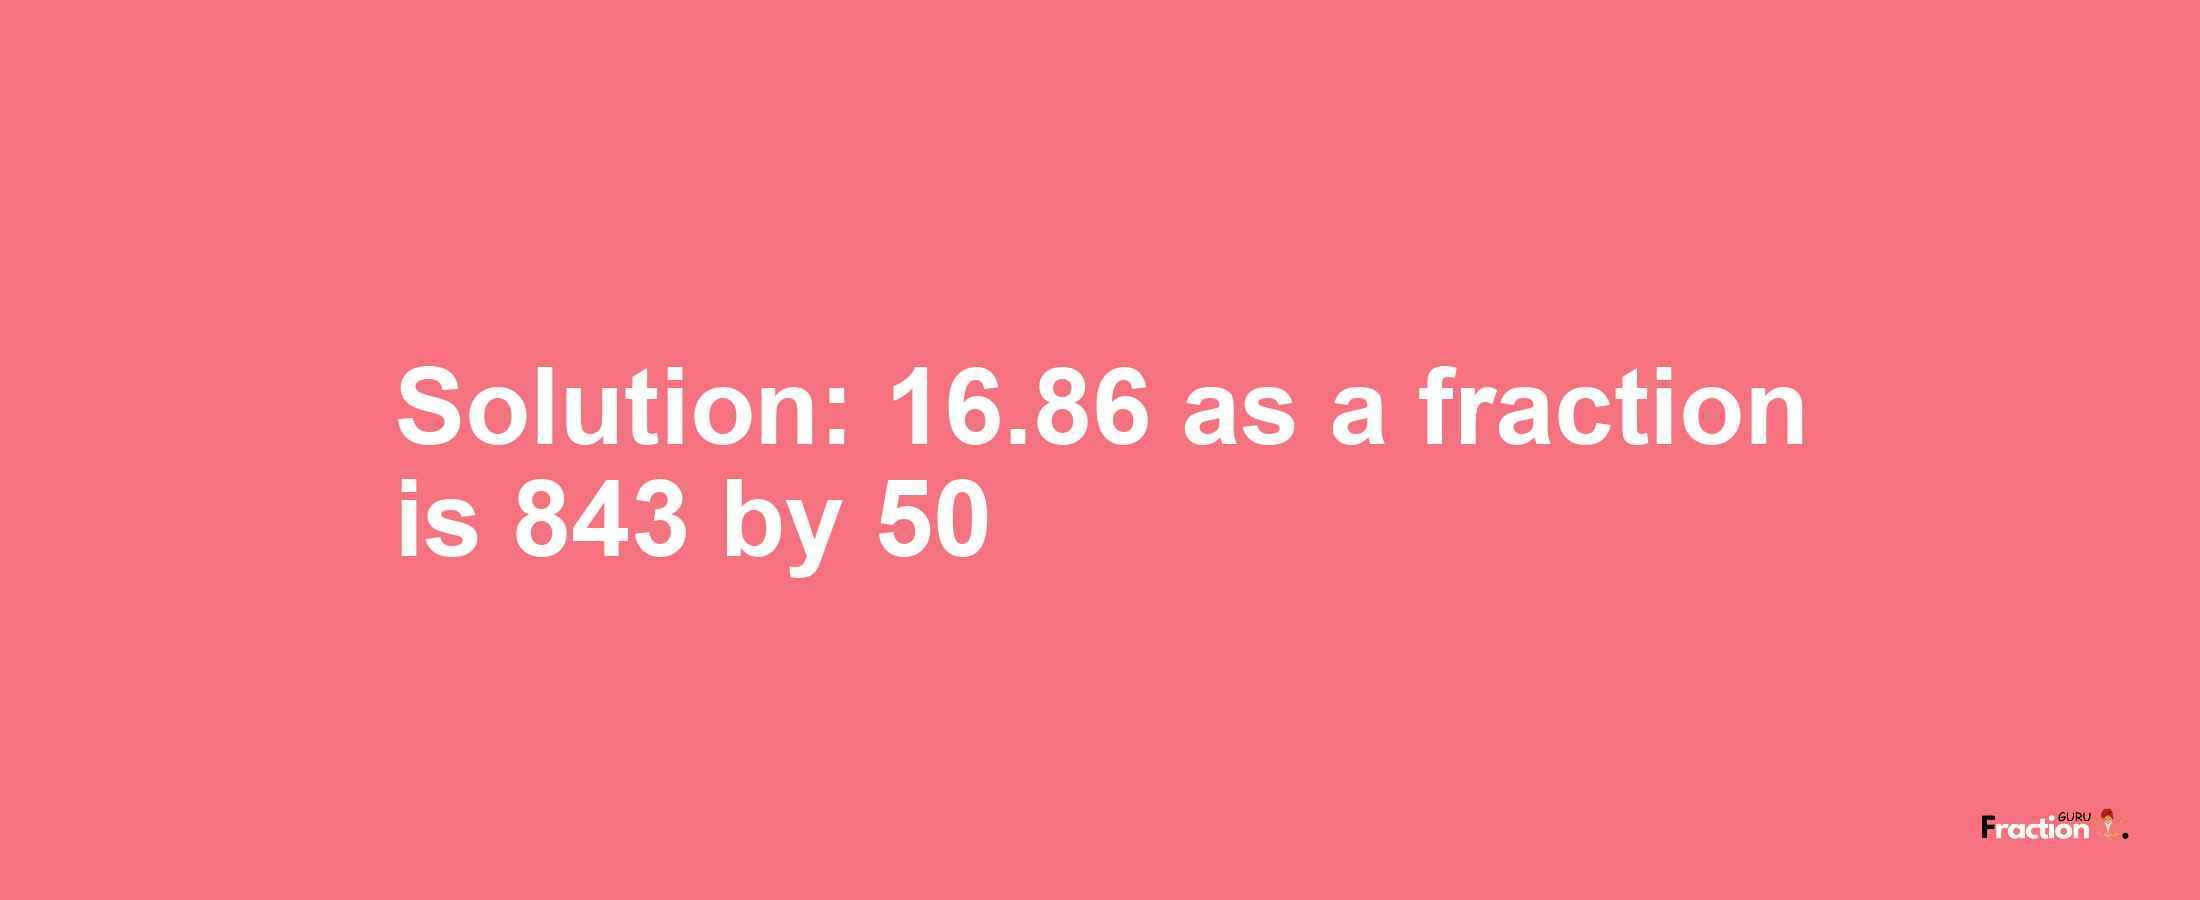 Solution:16.86 as a fraction is 843/50